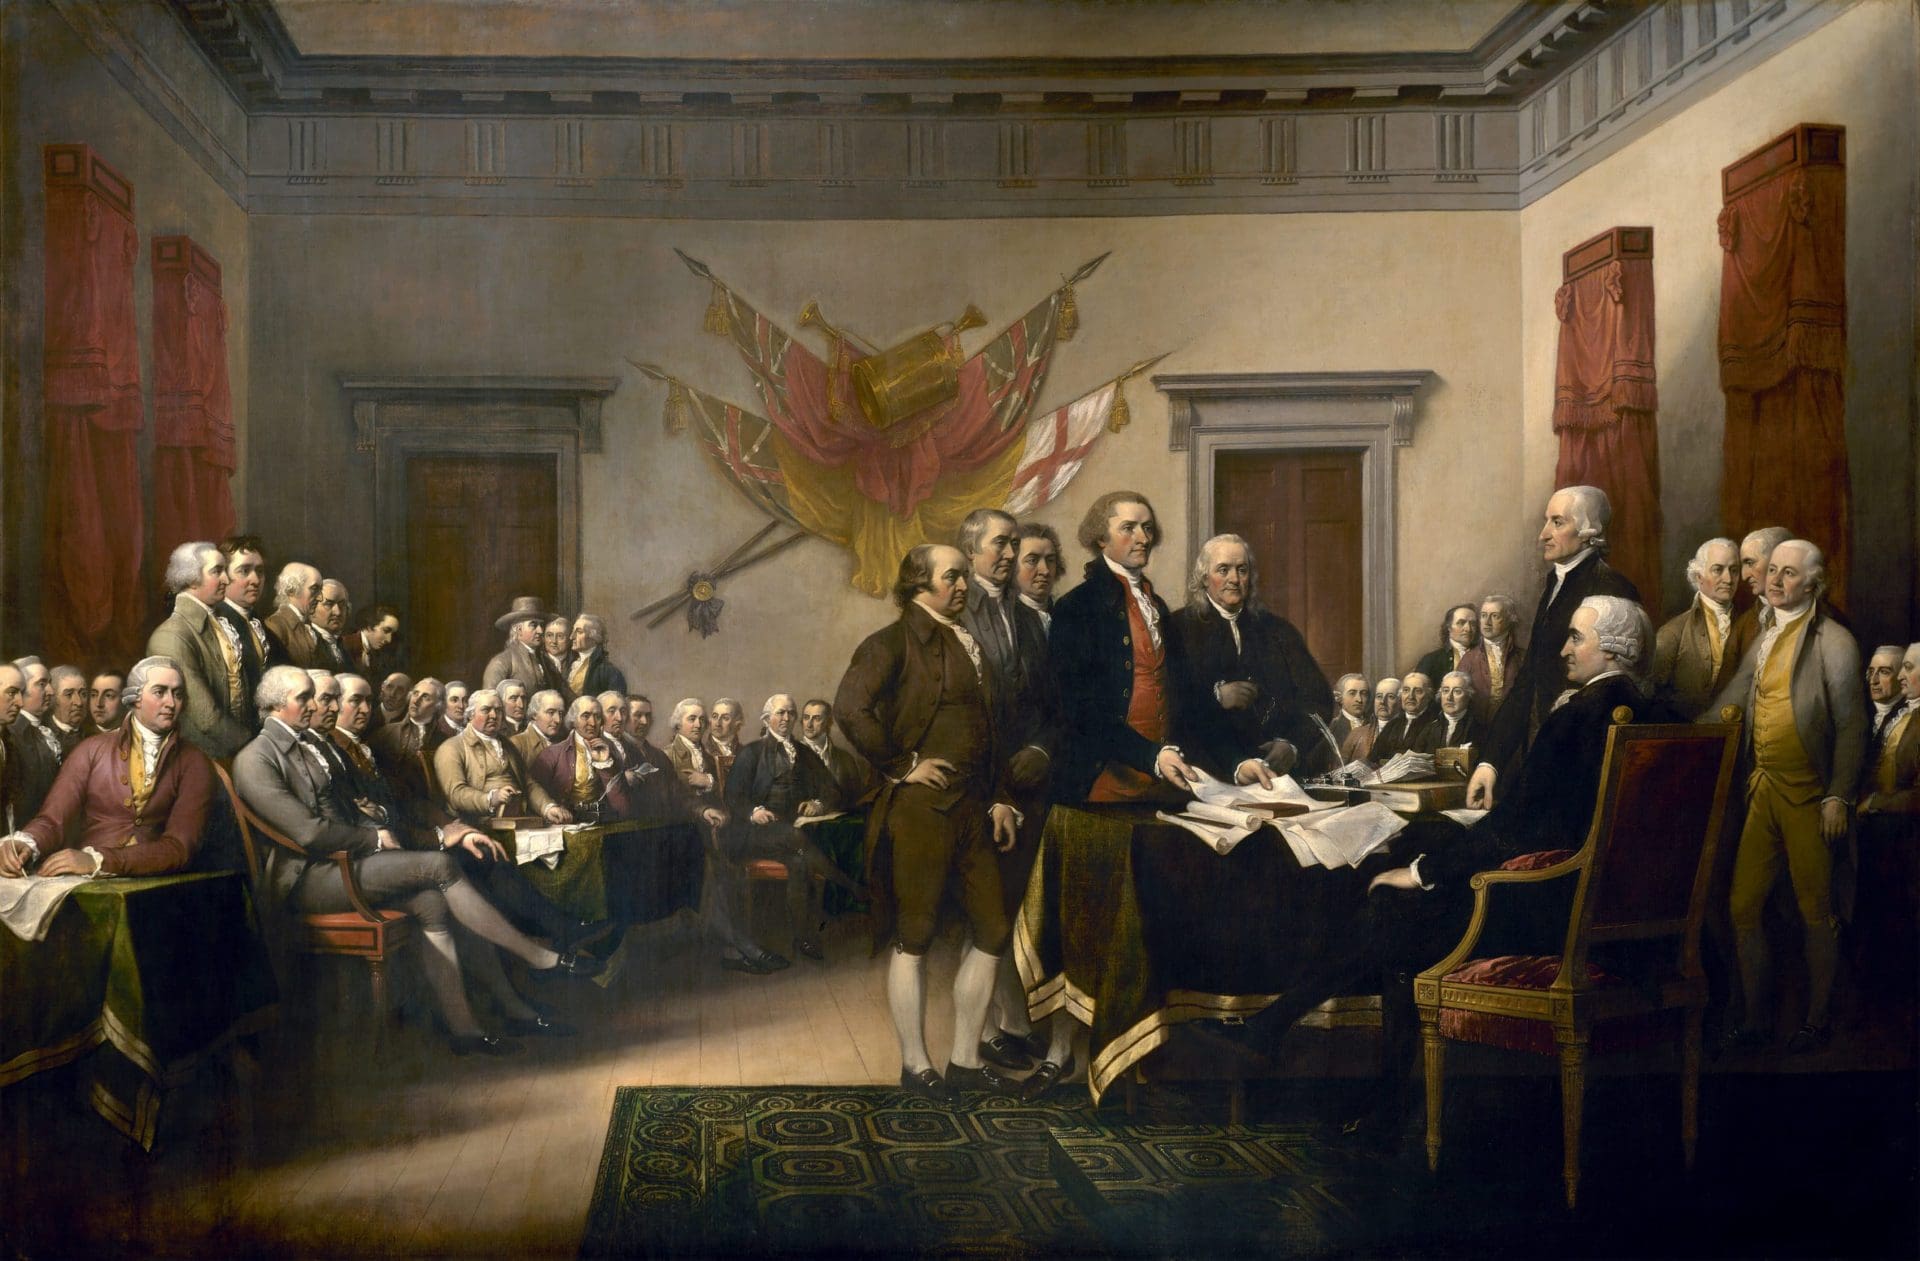 Declaration_of_Independence_(1819),_by_John_Trumbull